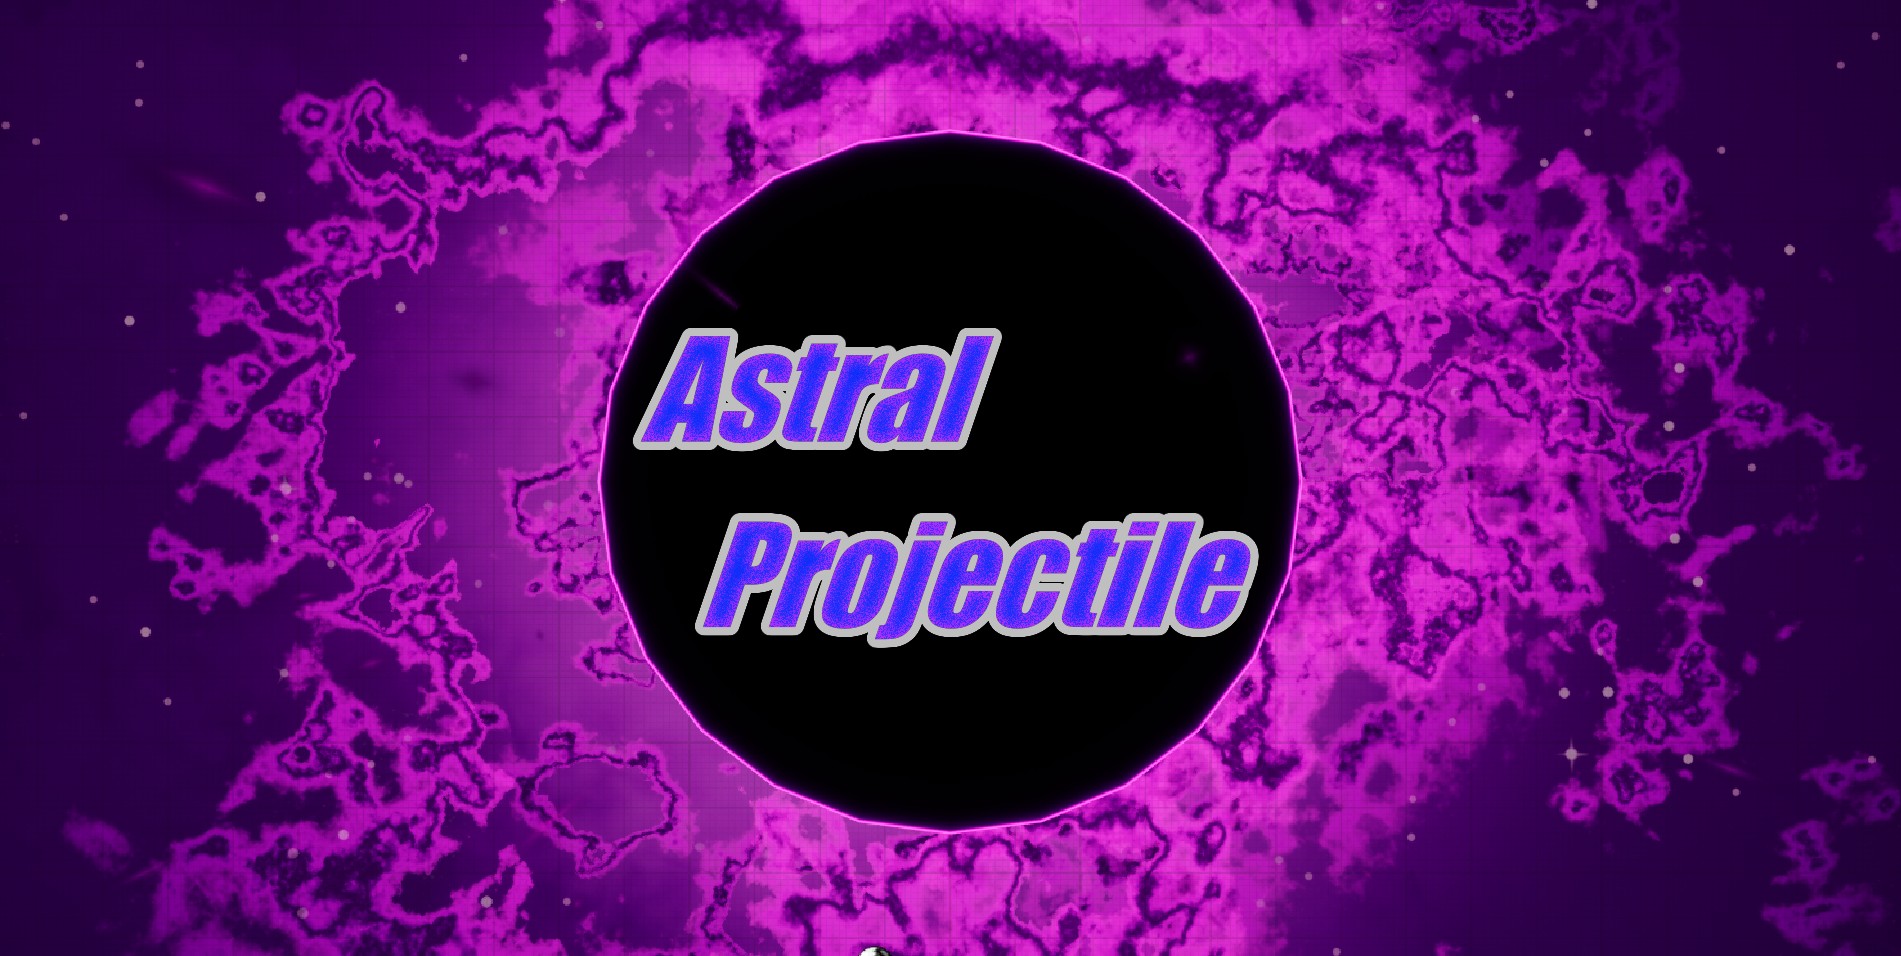 Astral Projectile